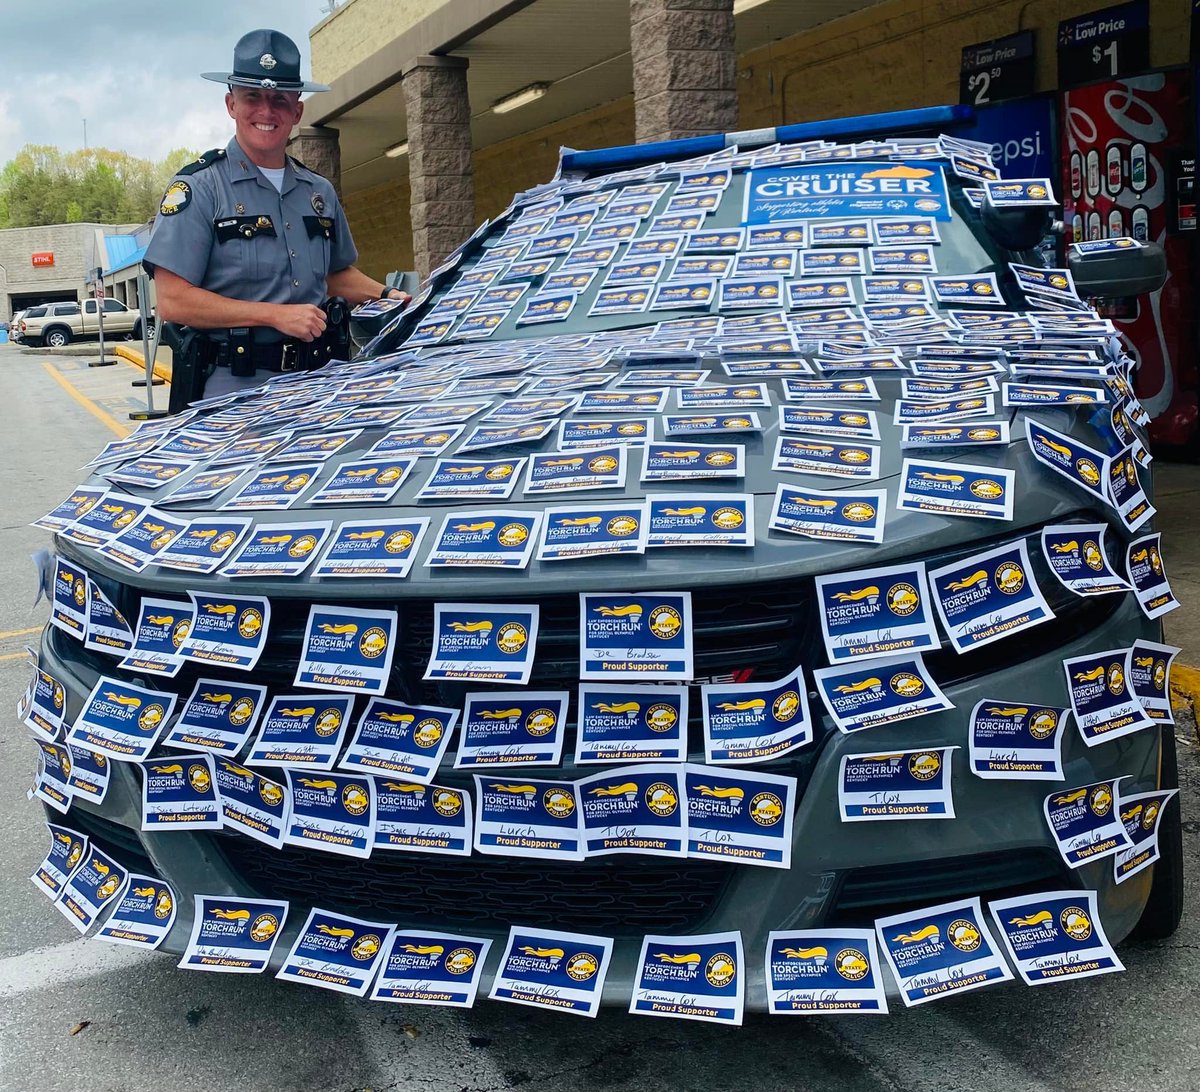 Cover the Cruiser with the @kystatepolice is back in action today in Murray! Join us at Pocket's Shell from 10am- 2 pm (CT) to Cover the Cruiser with icons to support Special Olympics athletes! @ShellKloc